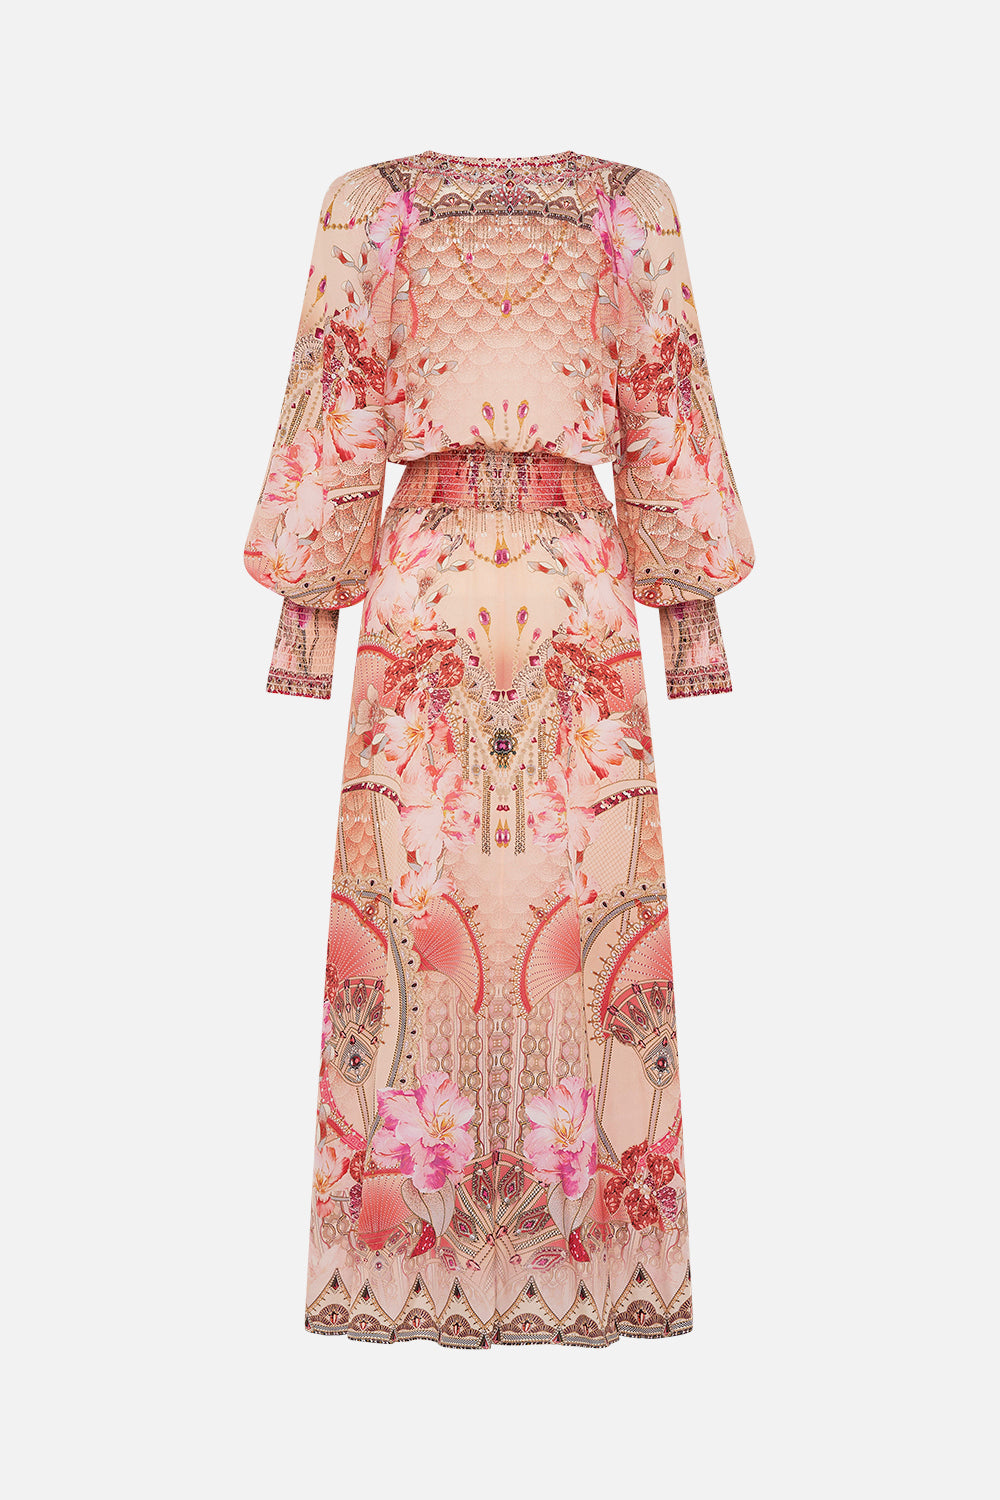 Back product CAMILLA pink floral silk dress in Adore Me print